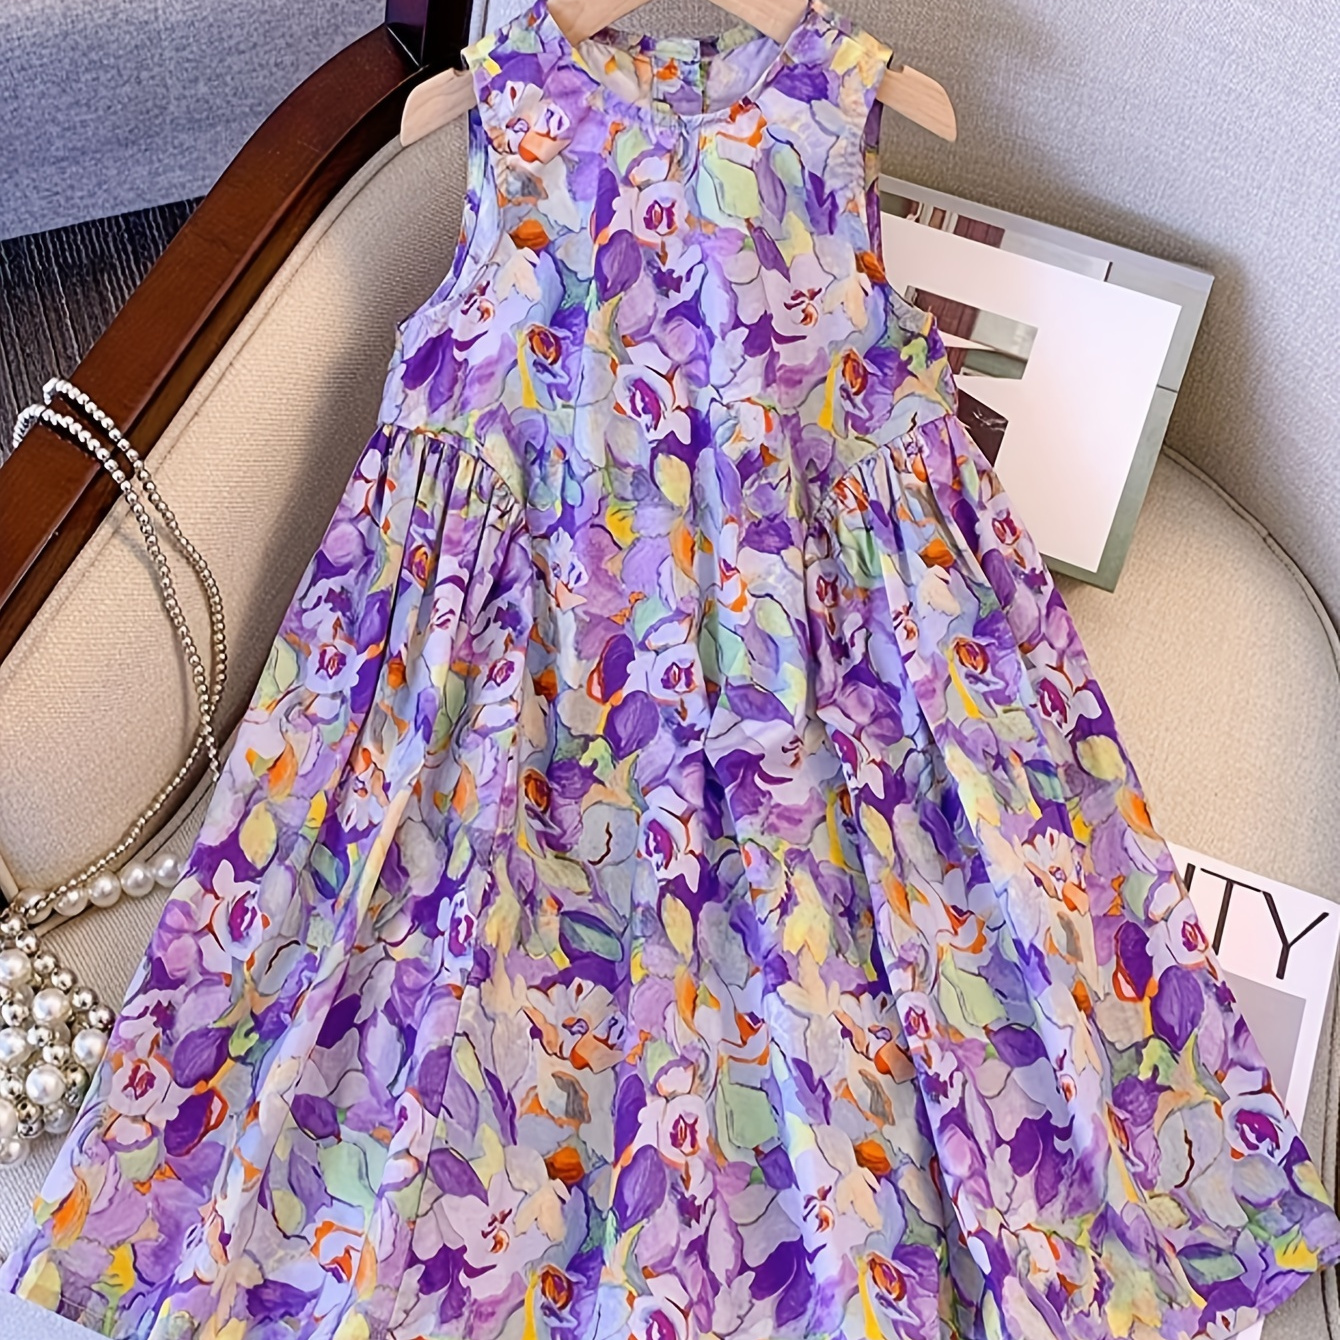 

Purple Floral Girl's Cotton Sundress, Sleeveless Swing Dress For Summer Outdoor Vacation